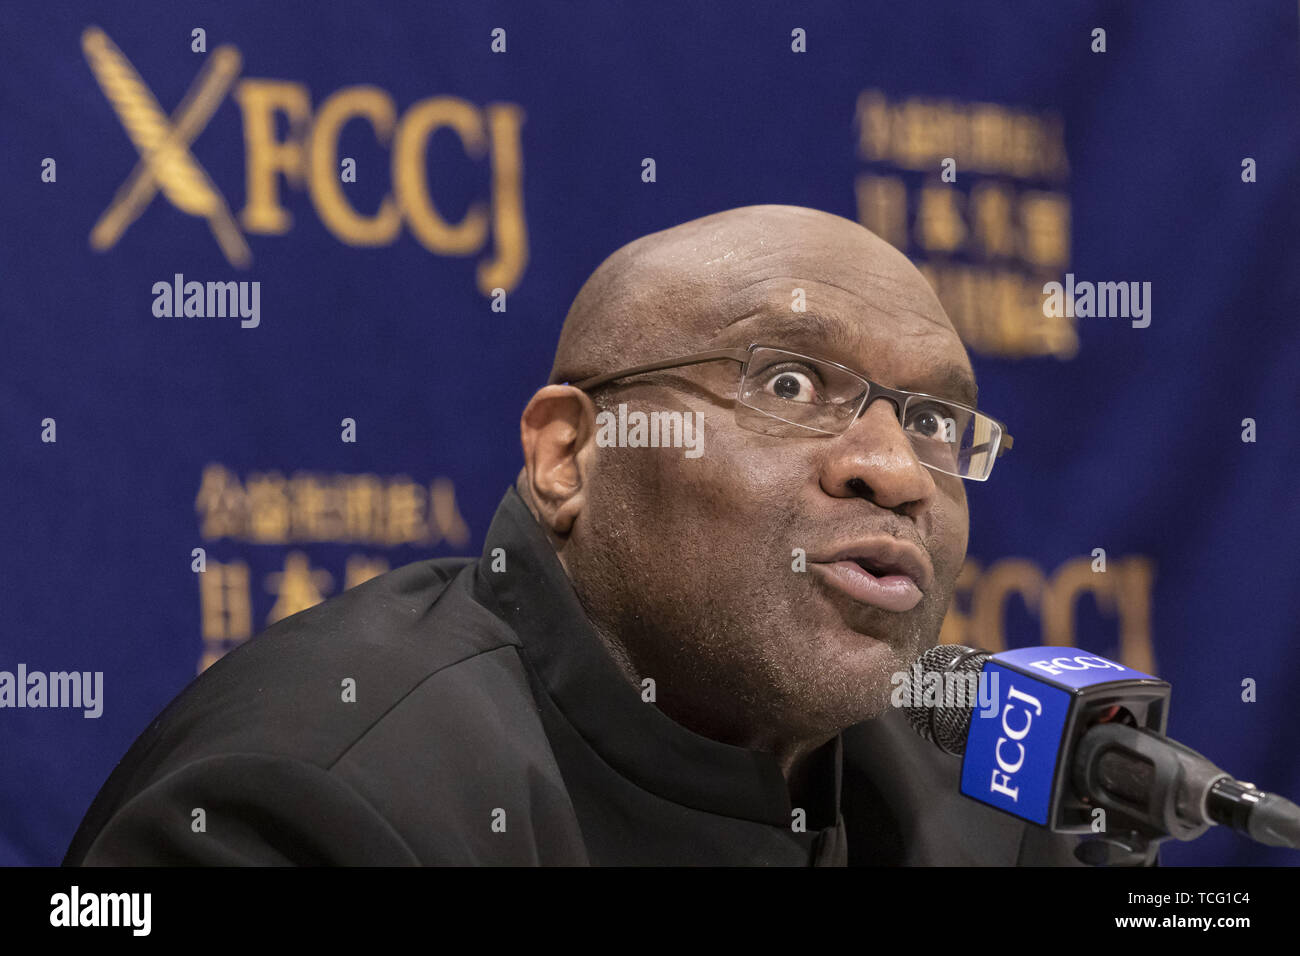 Tokyo, Japan. 7th June, 2019. American pro fighter and actor Bob Sapp speaks during a news conference at The Foreign Correspondents' Club of Japan in downtown Tokyo. Sapp, who is also a former American NFL player, WWE professional wrestler and World Champion kick boxer visited the Club to share his opinions about the Japanese TV industry as a foreigner celebrity in Japan. As actor he participated in several movies including 'Conan the Barbarian' and with Adam Sandler in 'The Longest Yard' Credit: Rodrigo Reyes Marin/ZUMA Wire/Alamy Live News Stock Photo